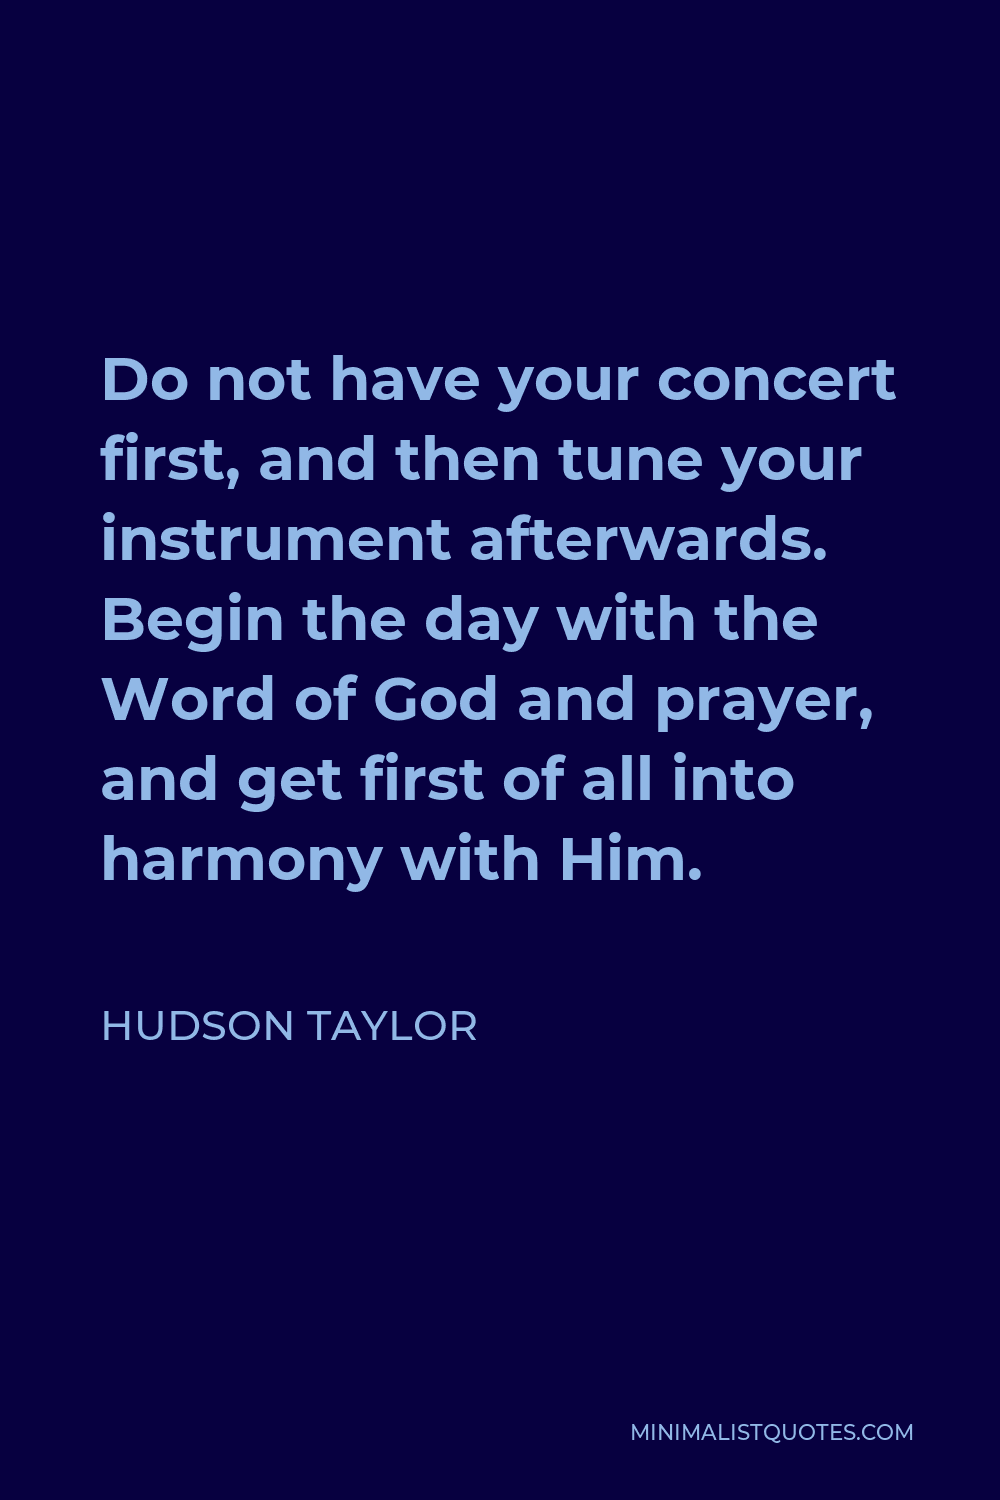 Hudson Taylor Quote - Do not have your concert first, and then tune your instrument afterwards. Begin the day with the Word of God and prayer, and get first of all into harmony with Him.